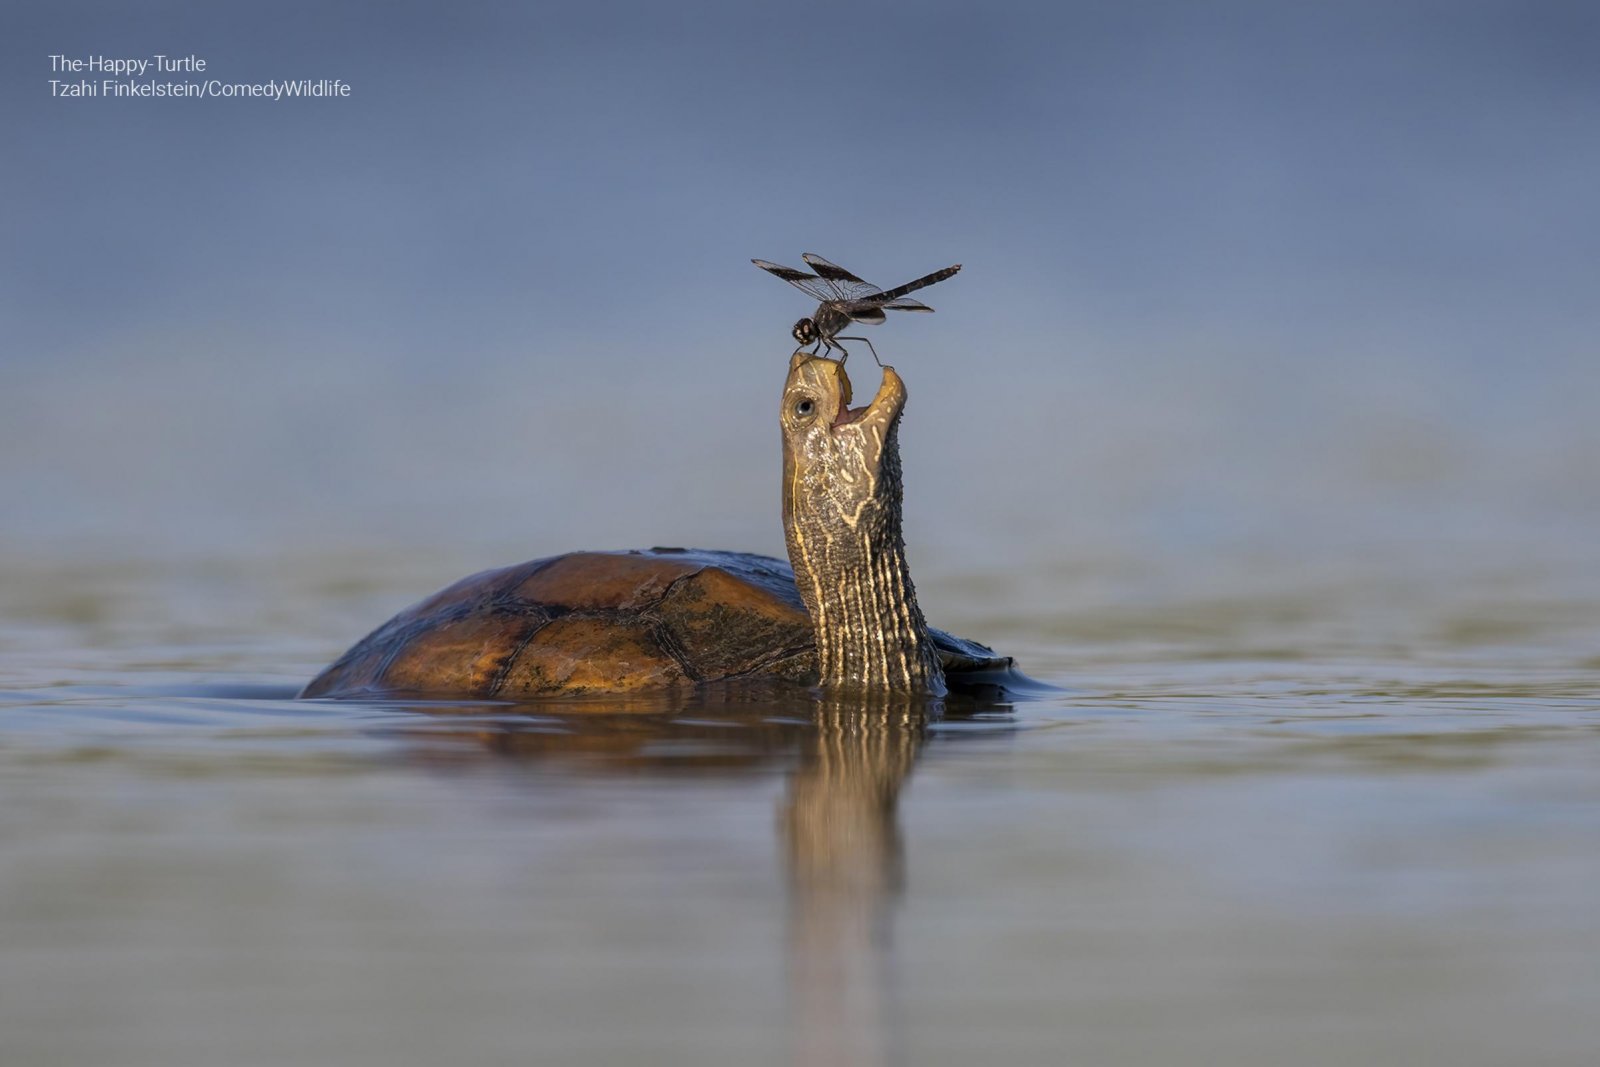 A turtle with its shell and neck out of the water with a bug hanging on its mouth